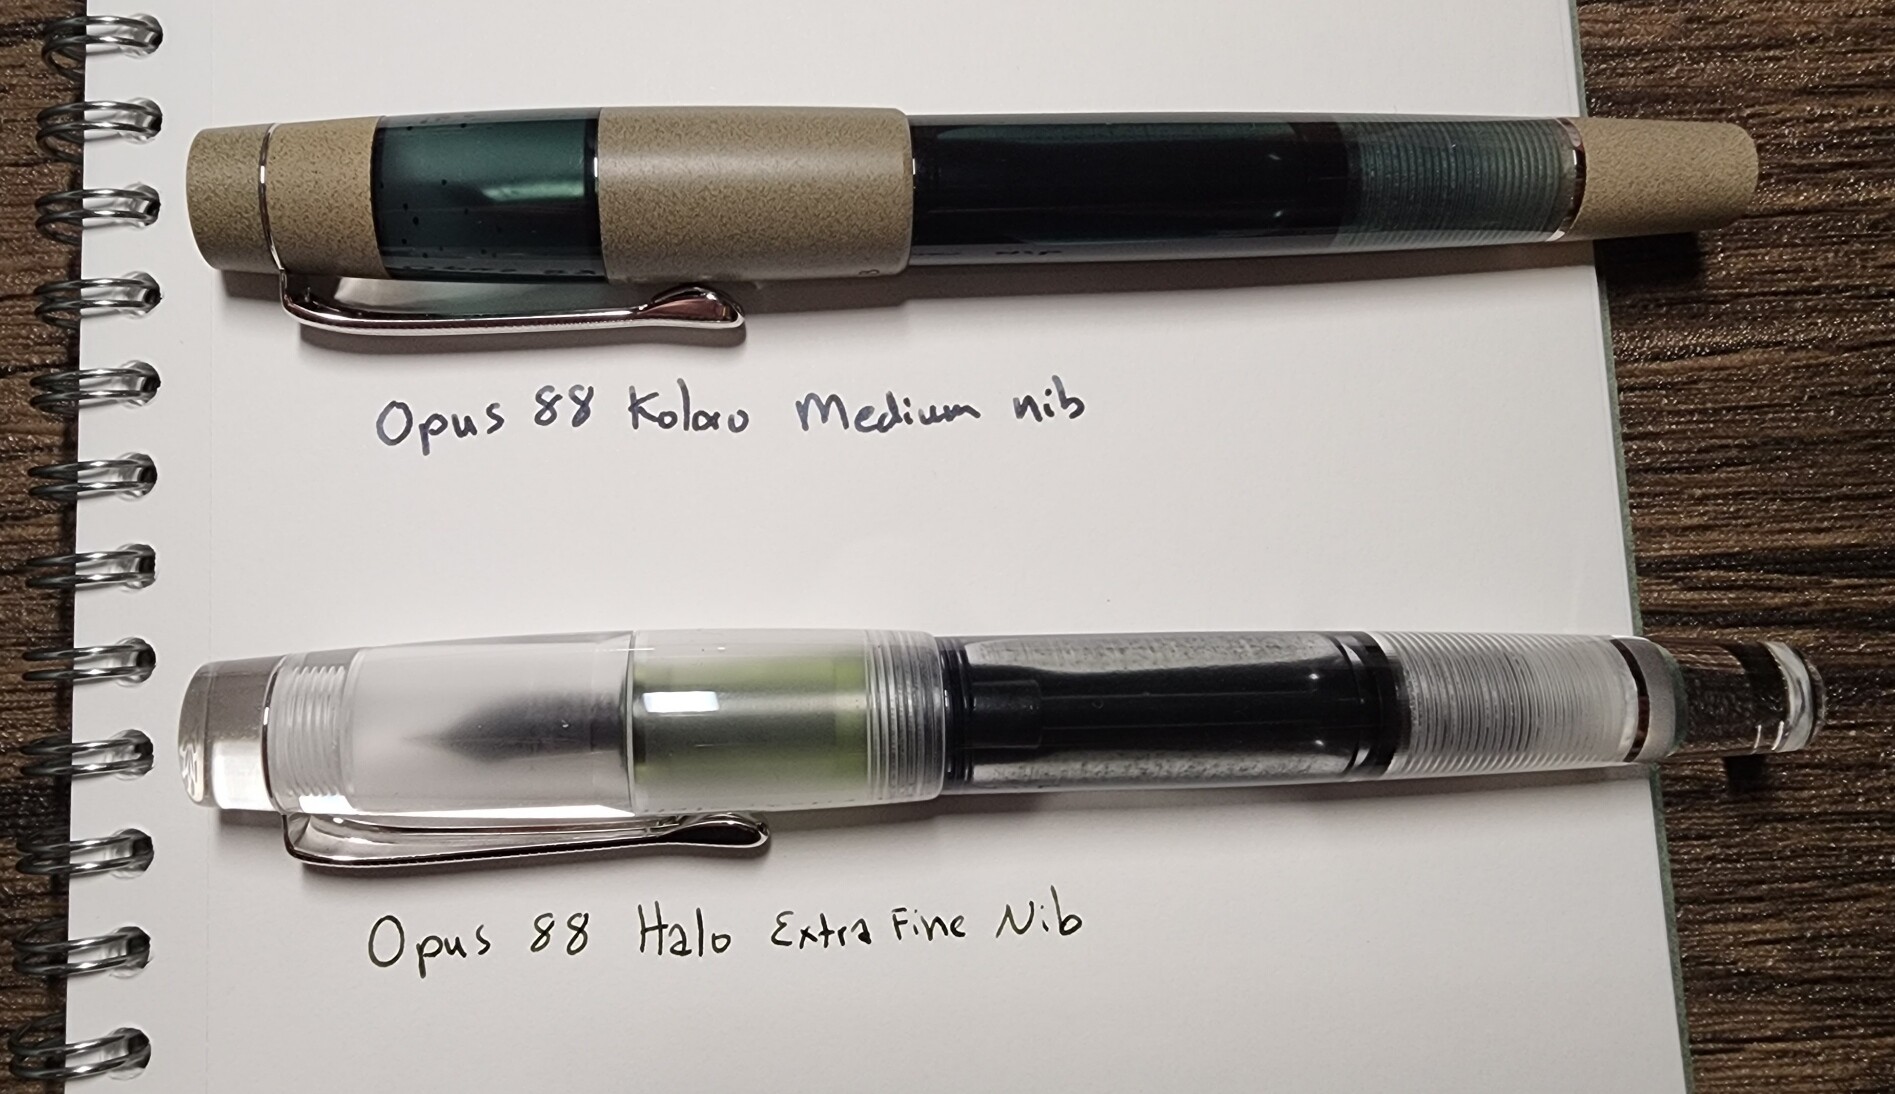 An Opus 88 Koloro pen in transparent teal acrylic/tan ebonite with a writing sample of the medium nib, and a transparent Opus 88 Halo with a green section next to a writing sample of the extra fine nib.